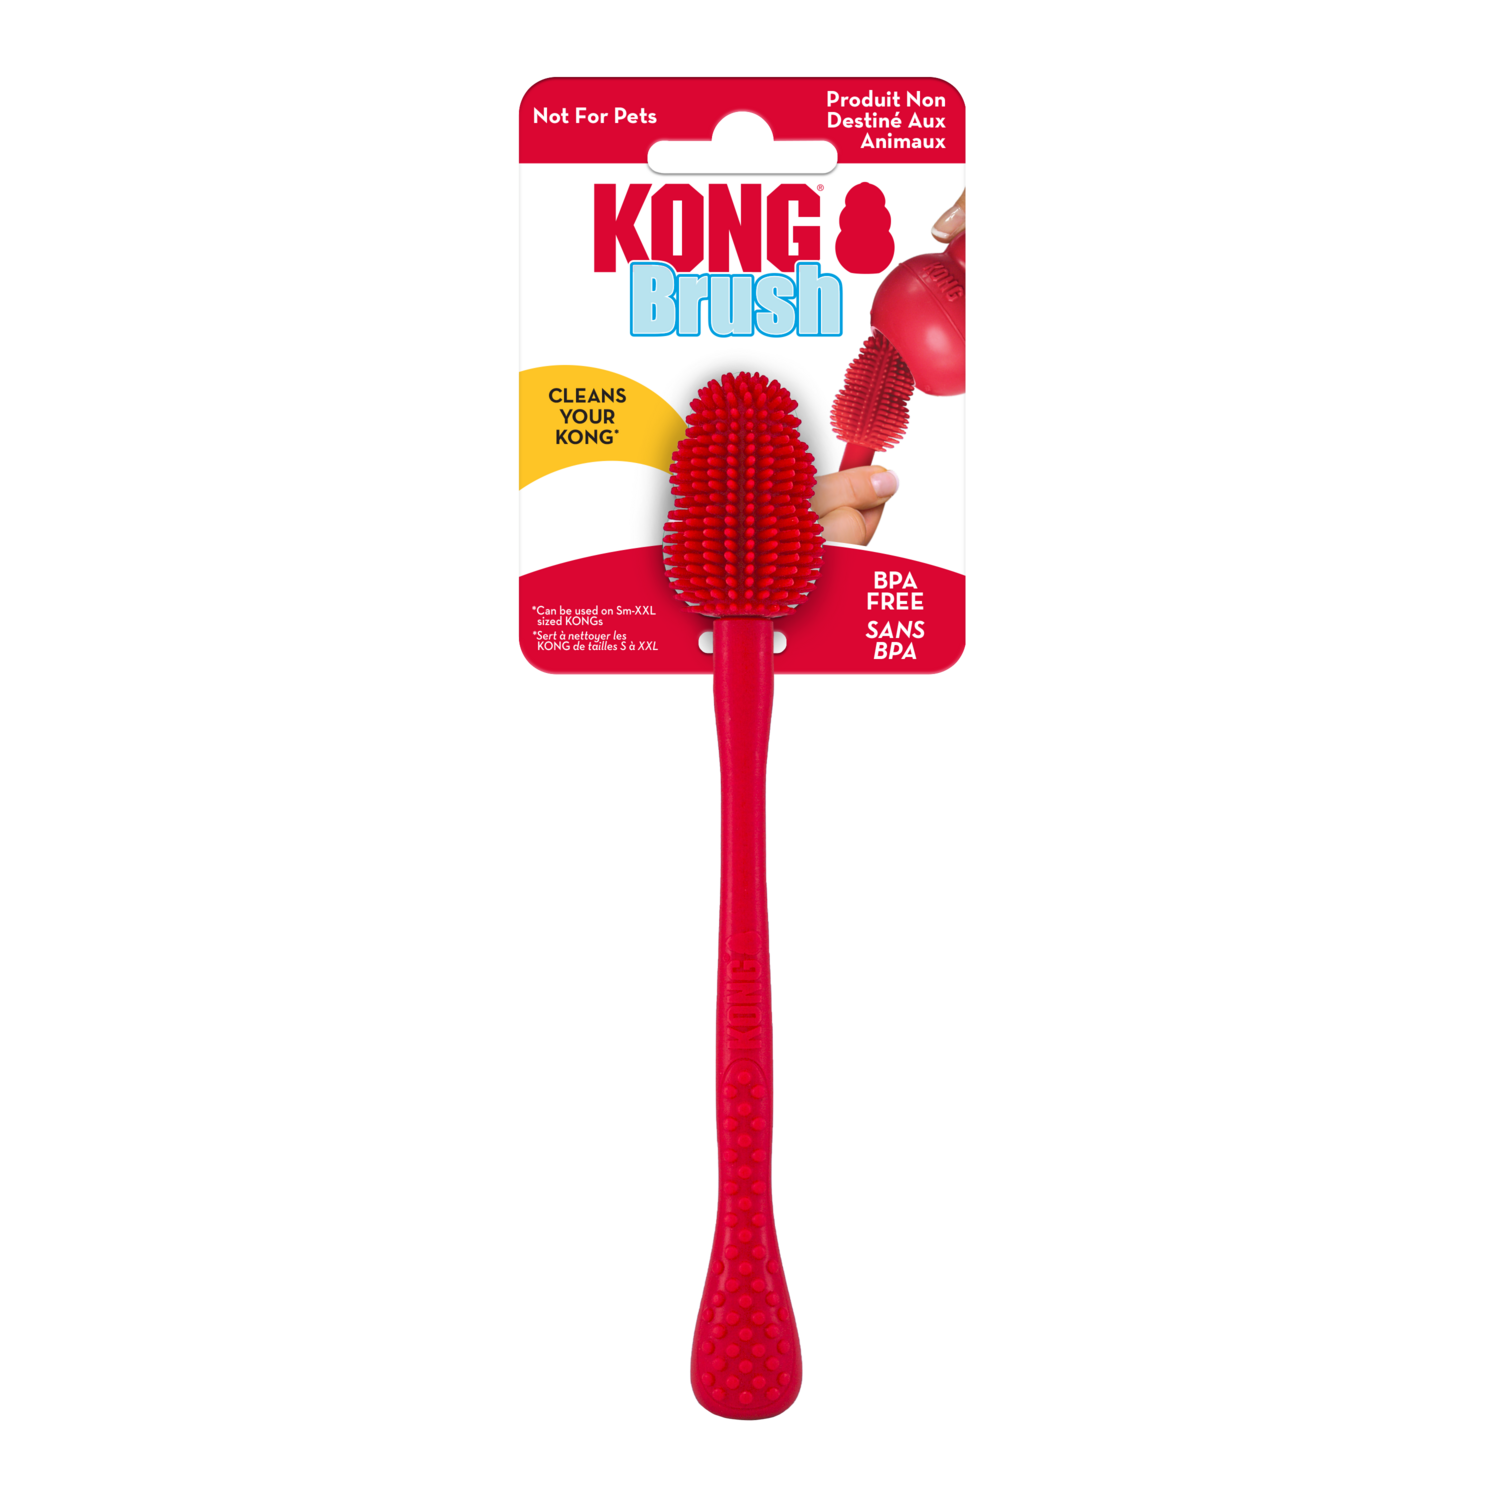 Kong brush easy cleaning